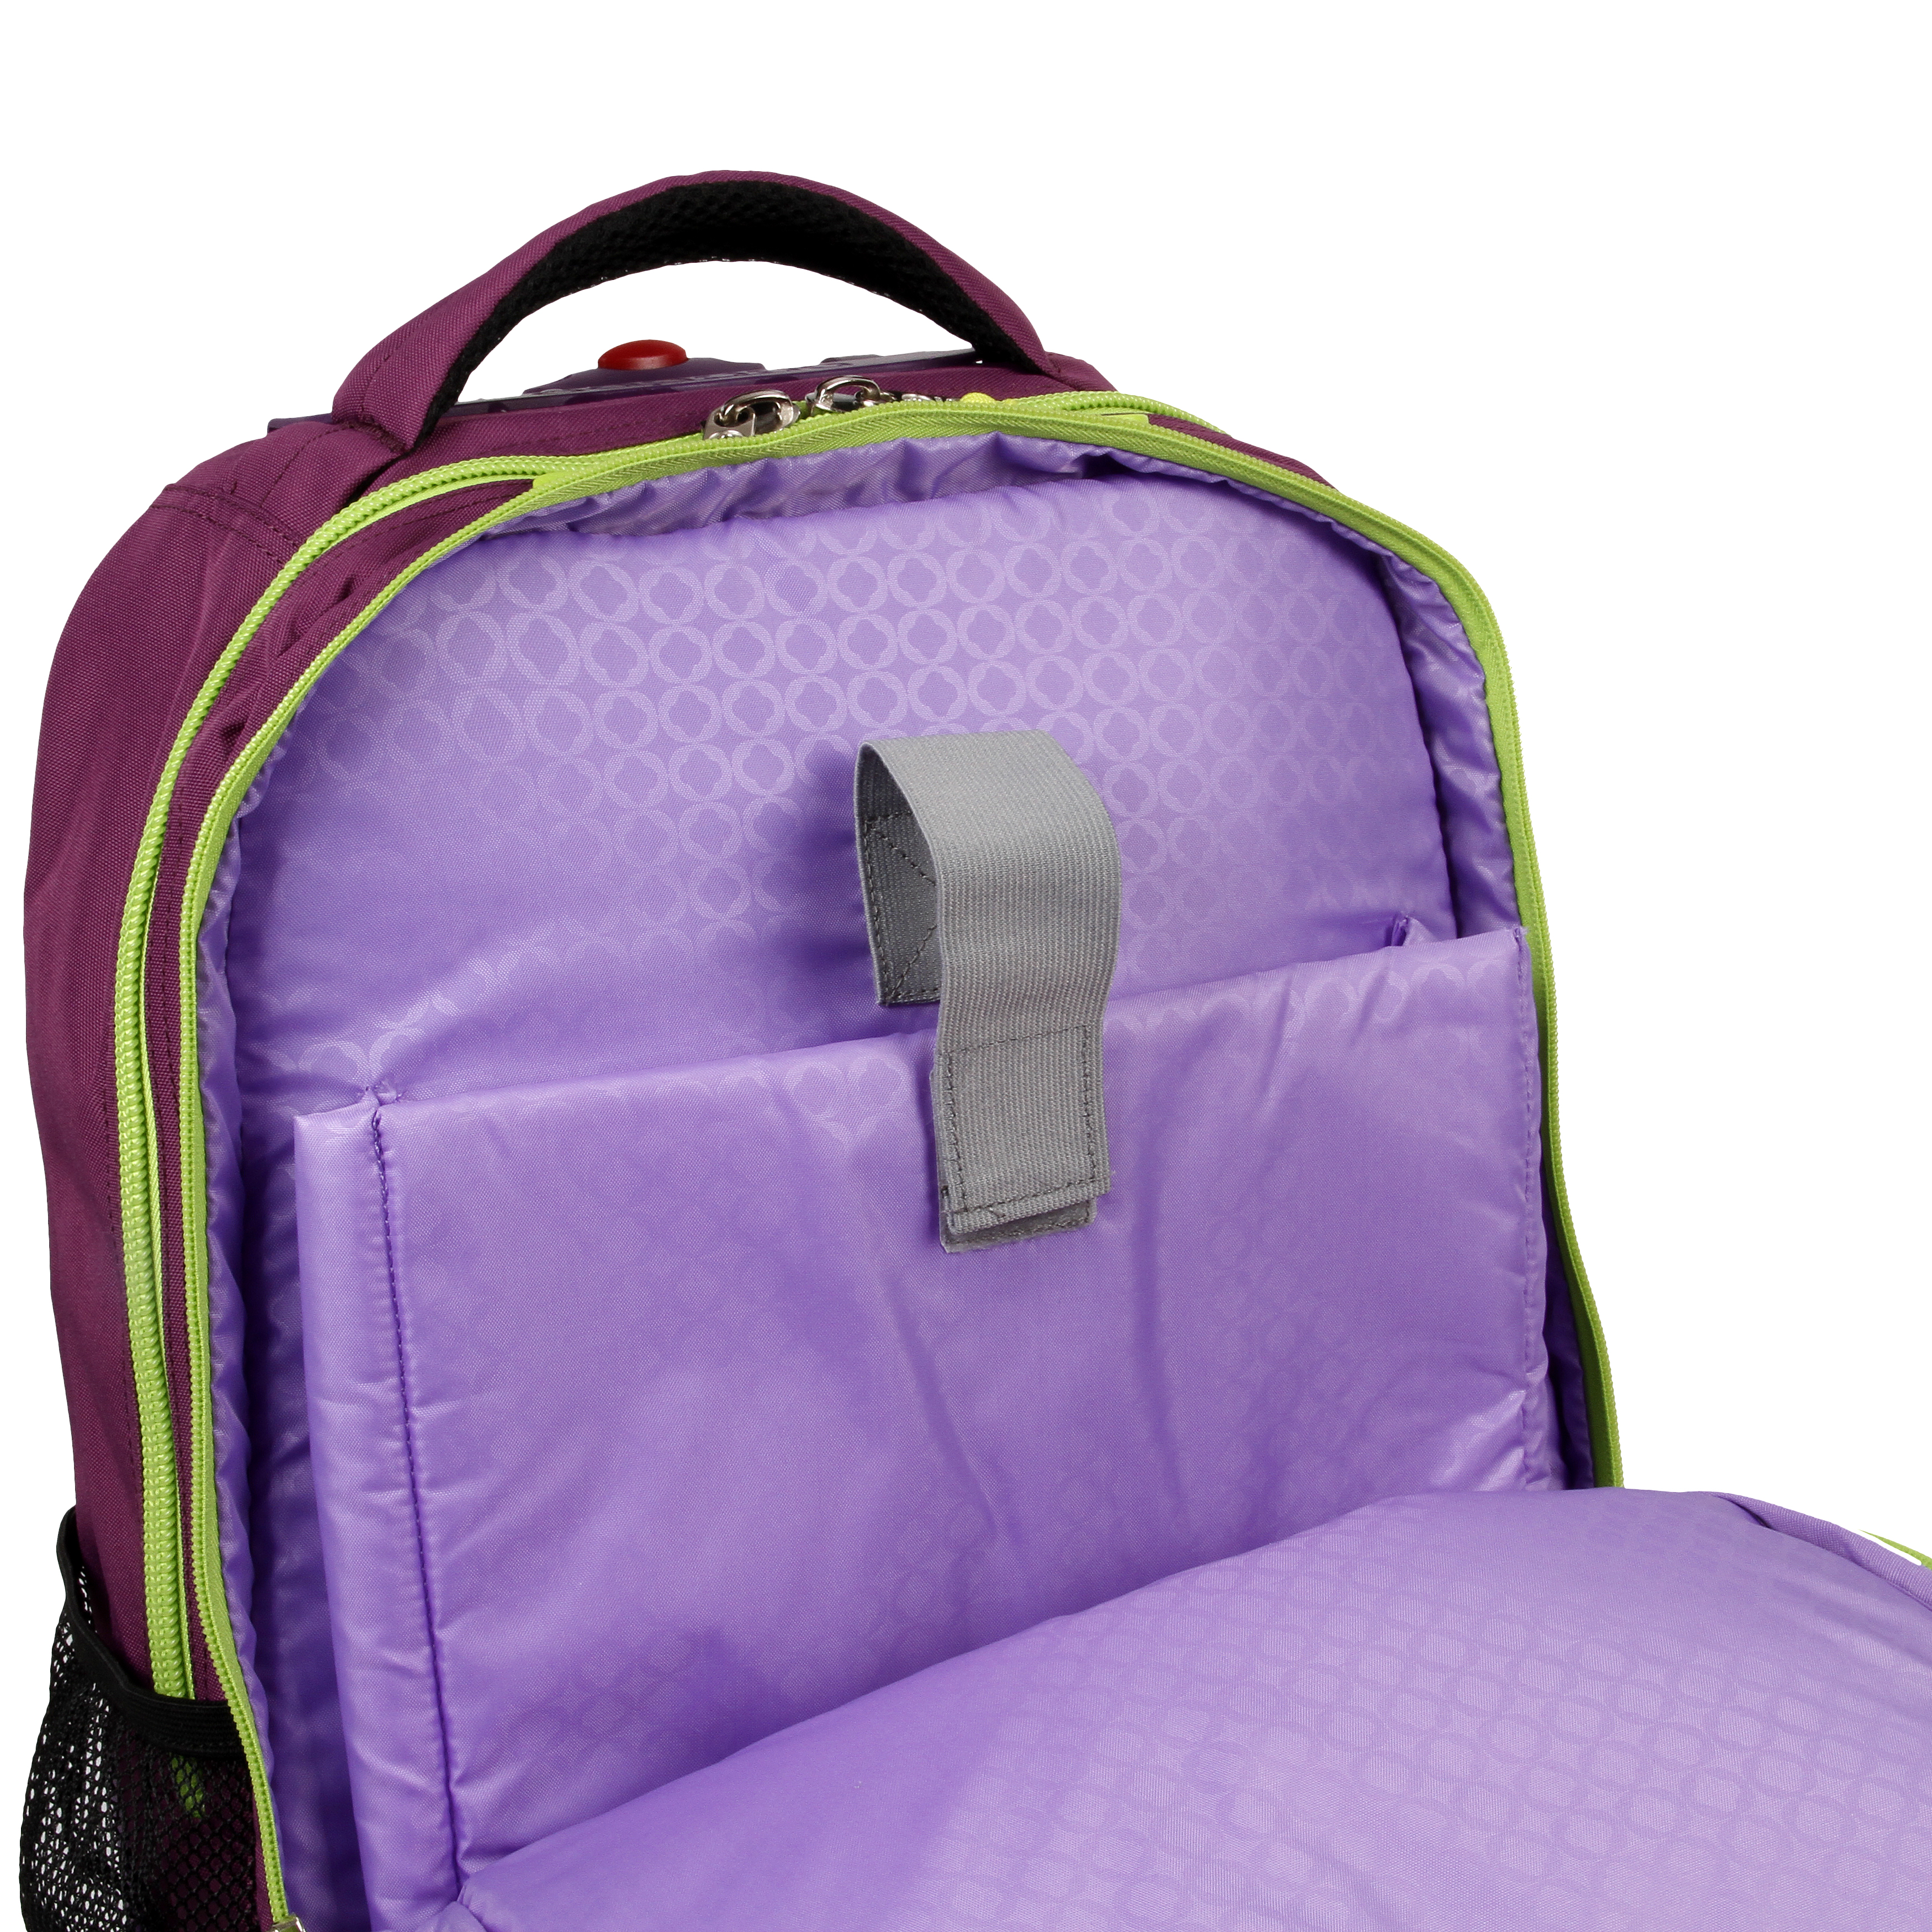 J World Girls Sundance 20" Rolling Backpack With Laptop Sleeve For School And Travel, Purple - image 3 of 9